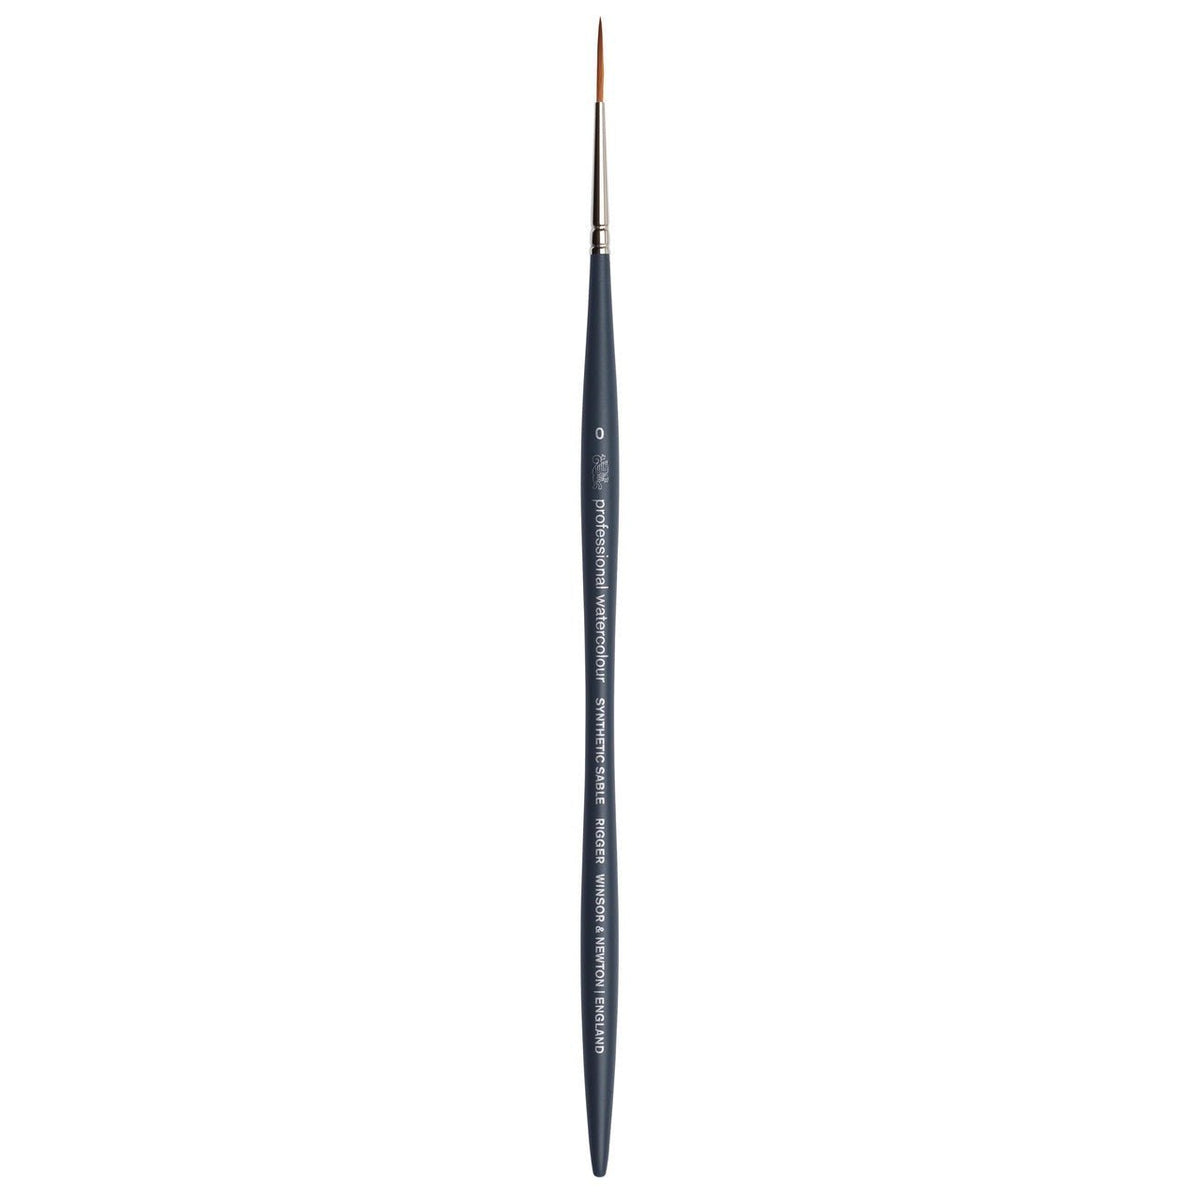 Winsor & Newton Professional Watercolor Synthetic Sable Brush - Rigger 0 - merriartist.com